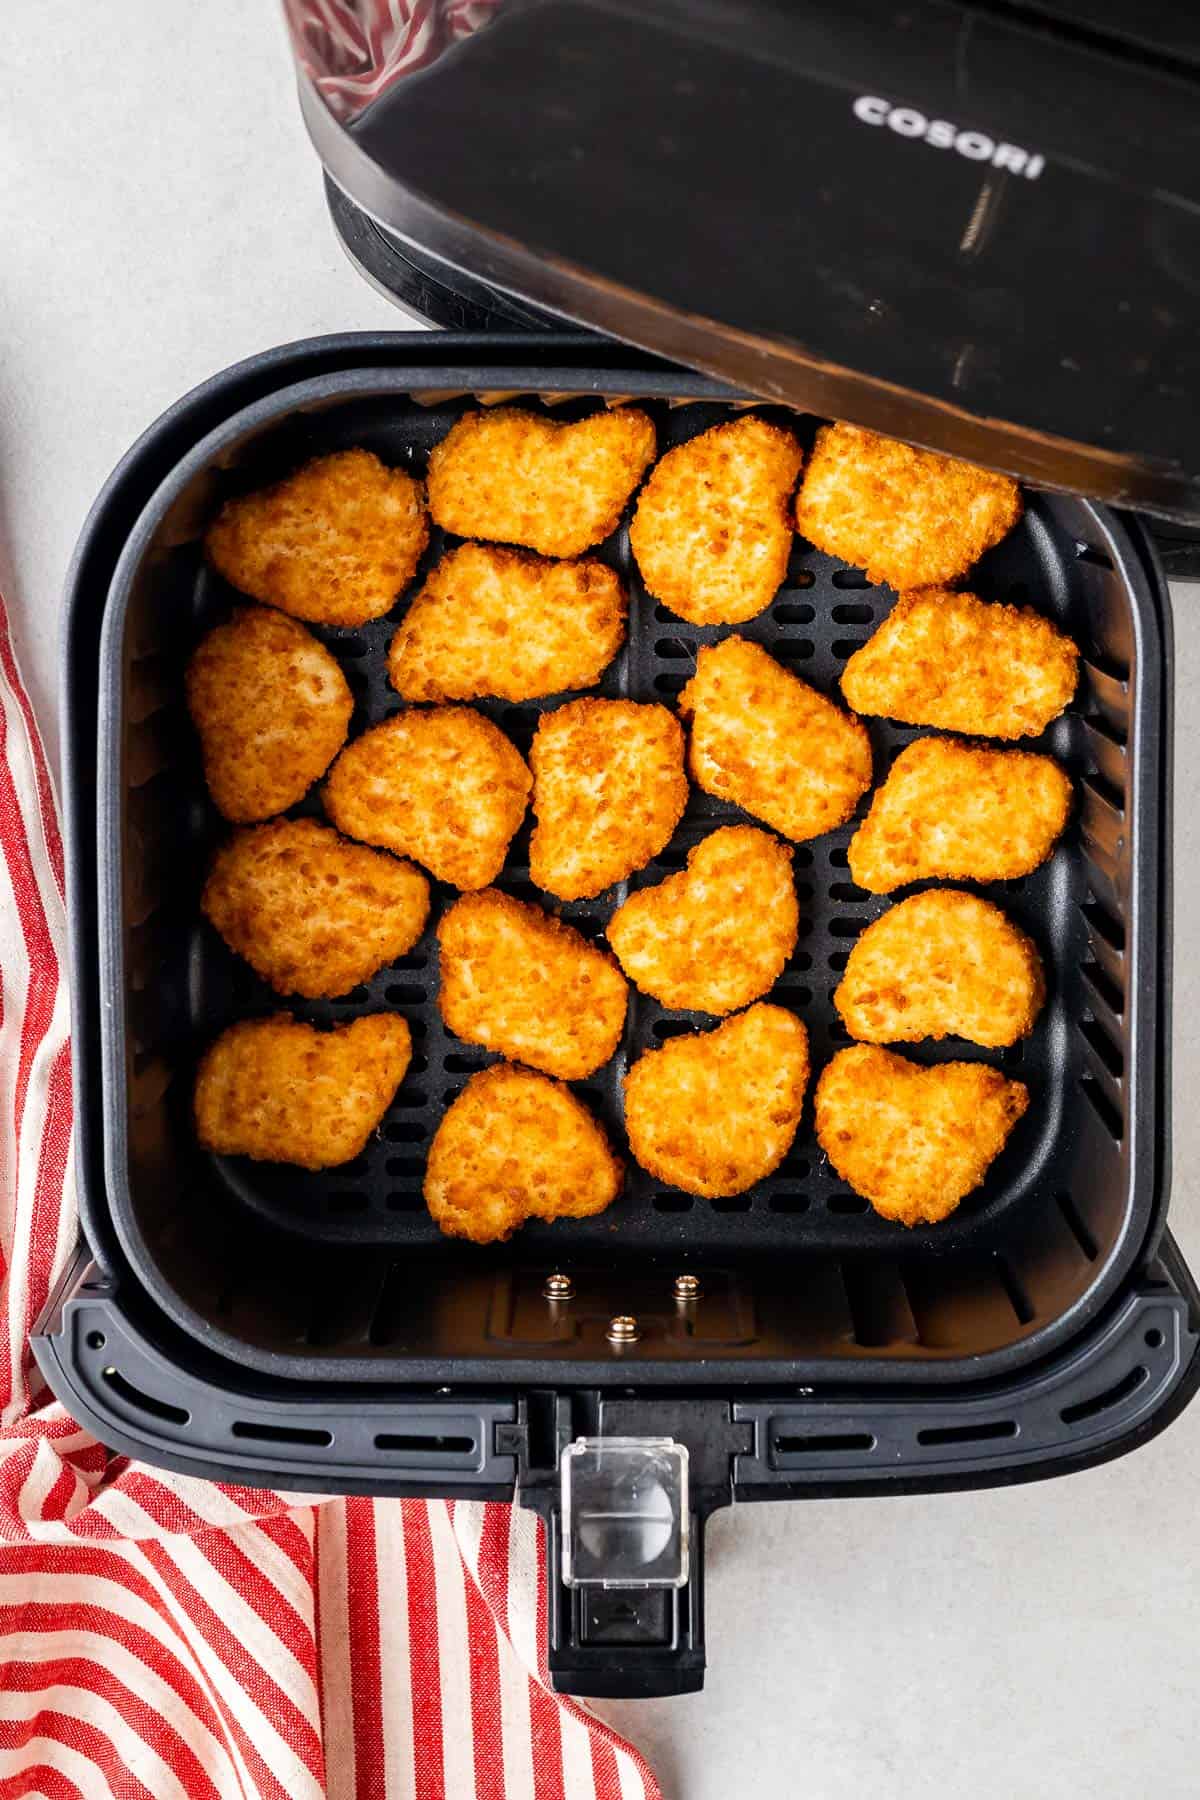 chicken nuggets in the air fryer basket after being flipped halfway through cooking